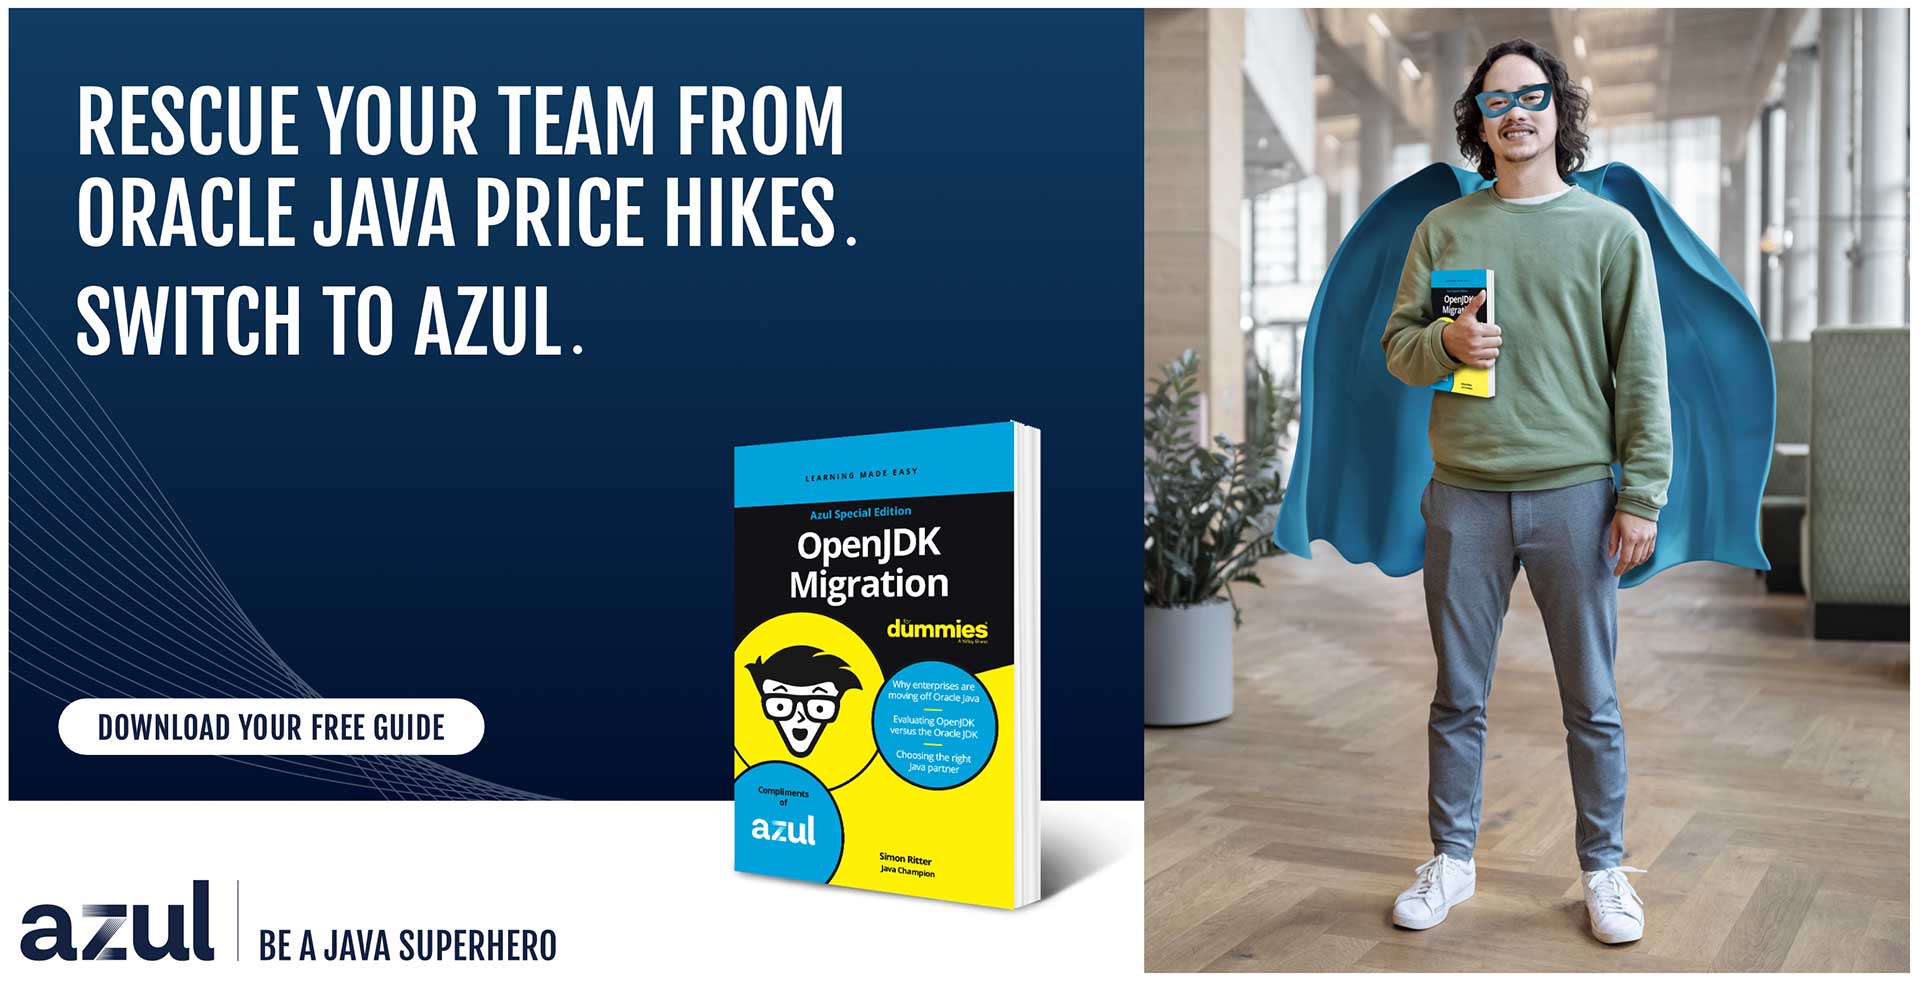 AZULE RESCUE YOUR TEAM FROM ORACLE JAVA PRICE HIKES. SWITCH TO AZUL.